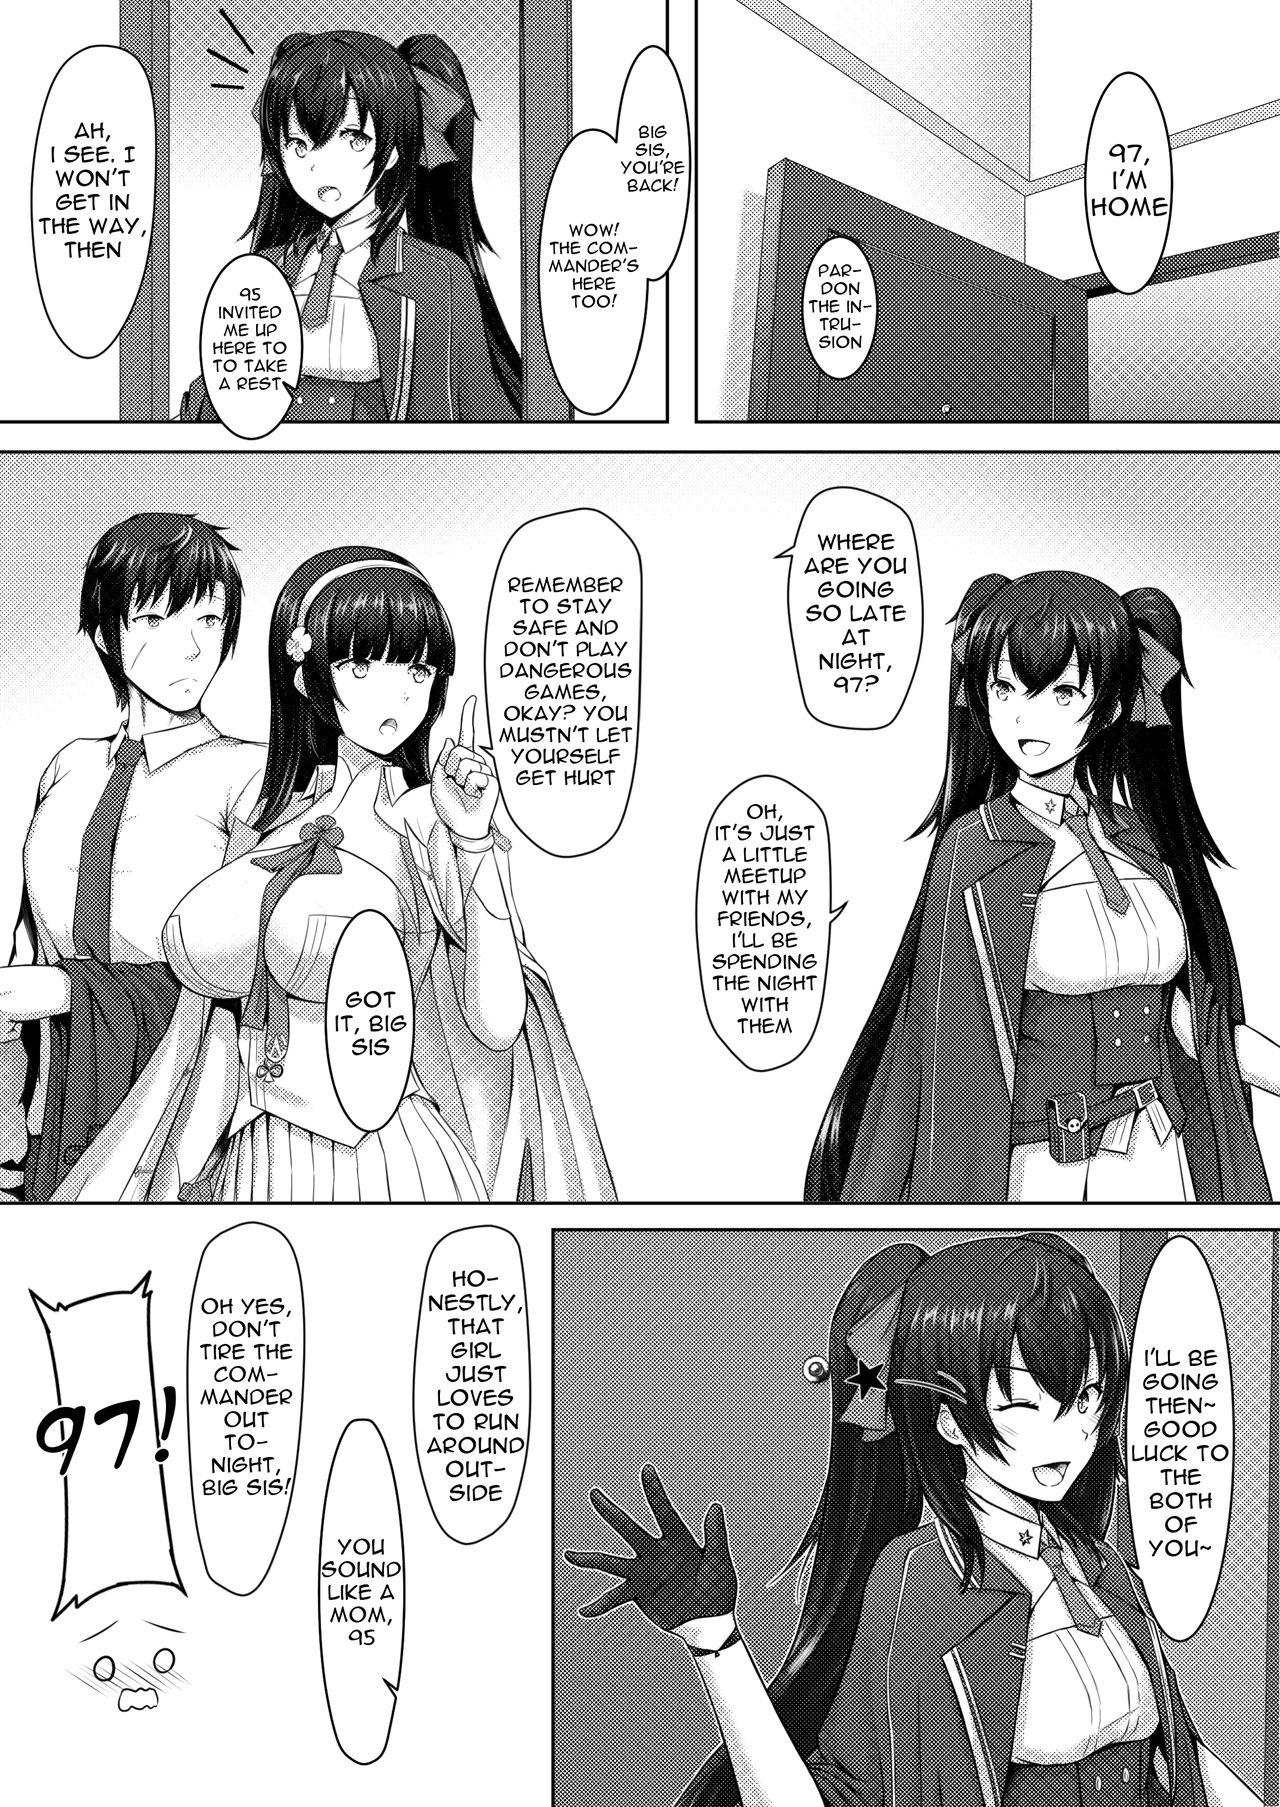 Blackmail A Lovely Flower's Gift - Girls frontline Female Orgasm - Page 4